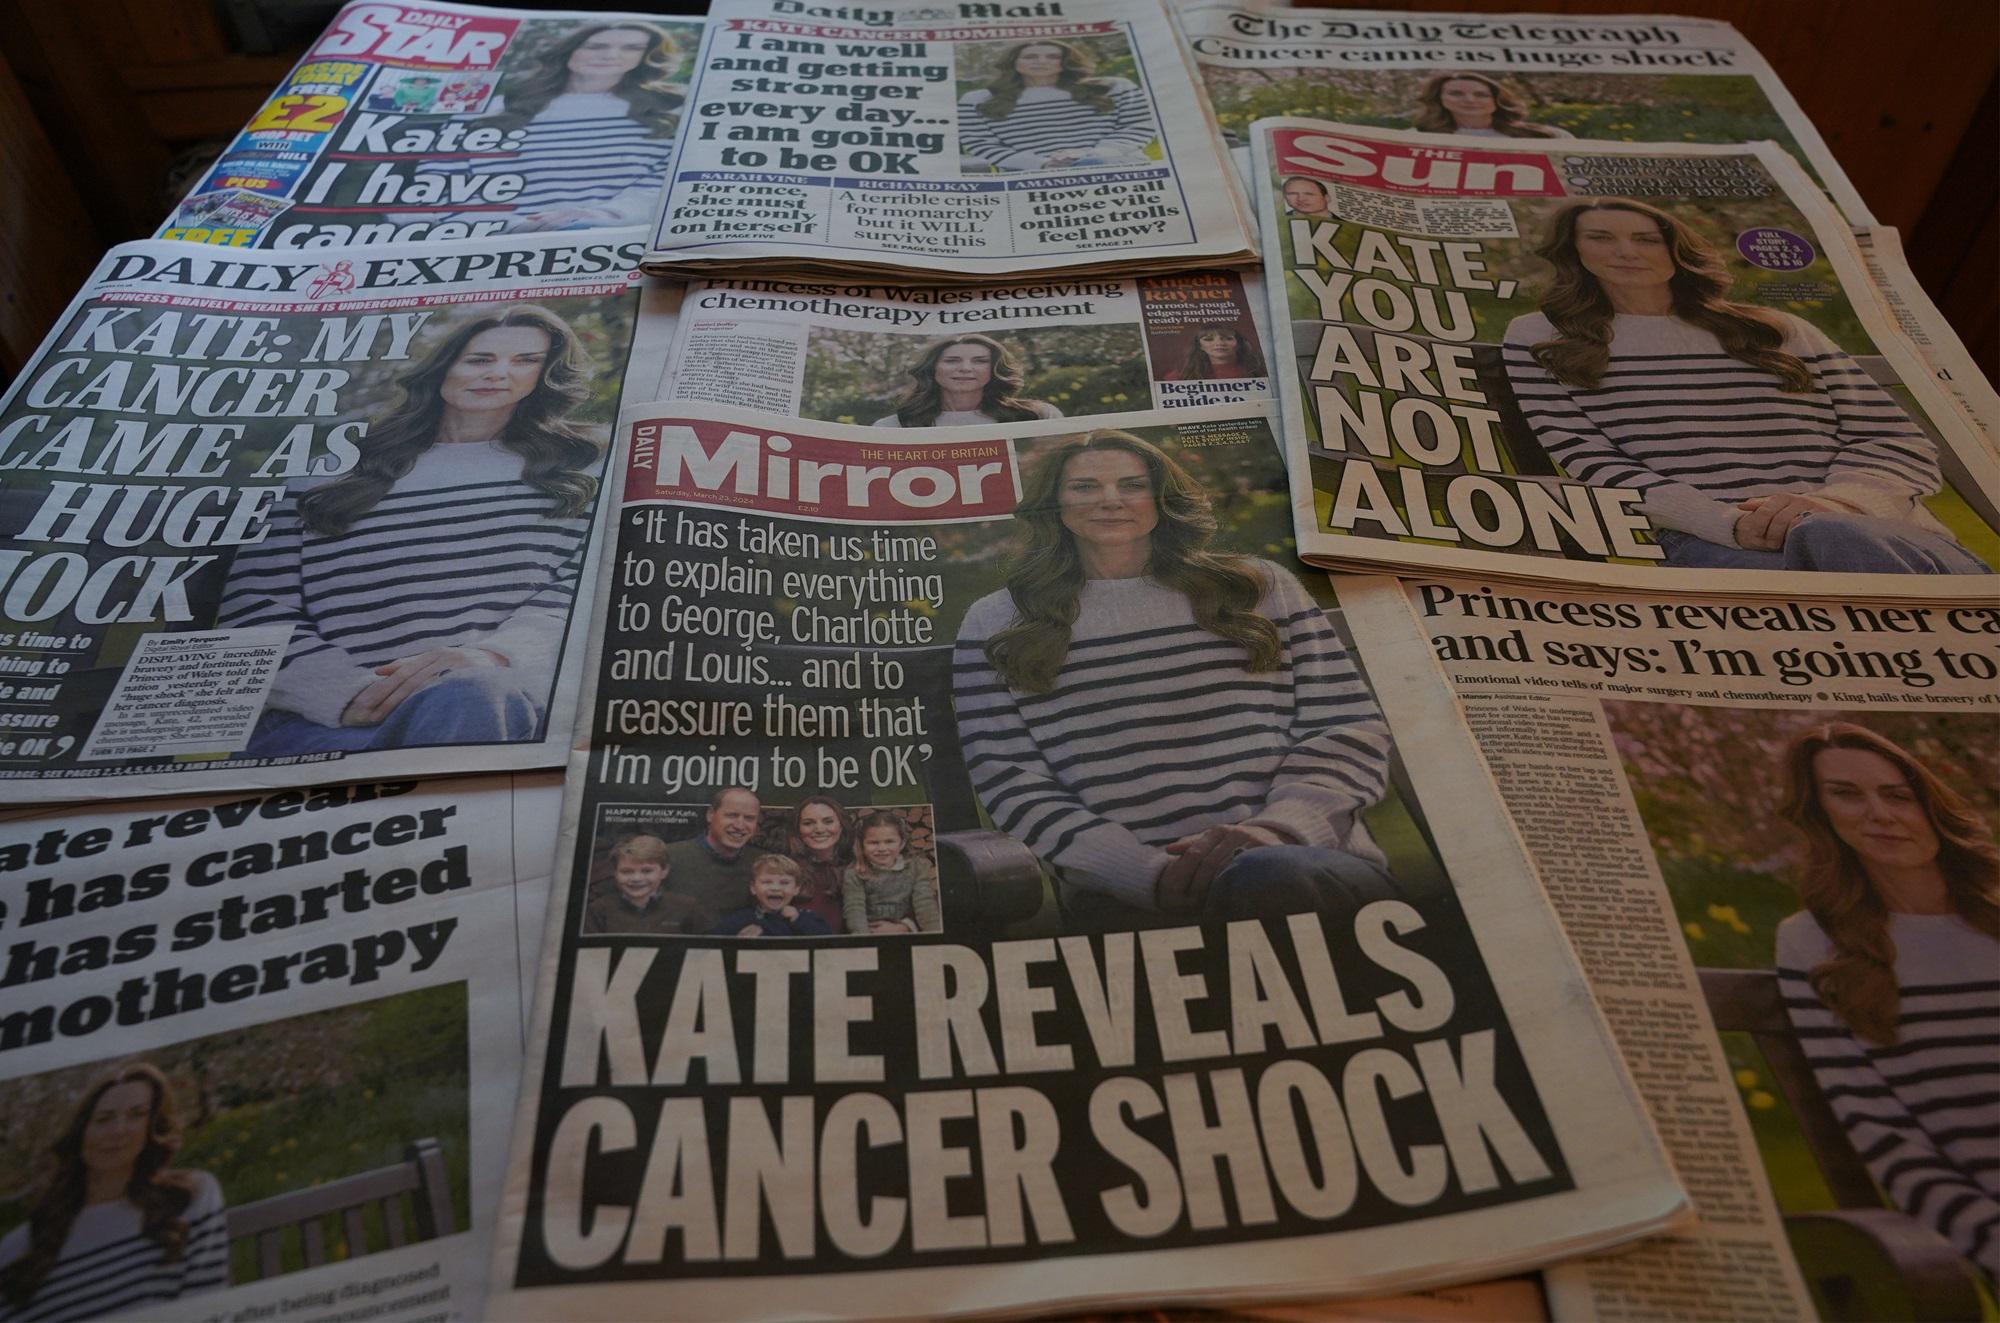 Kate Middleton and cancer, conspiracy theories continue